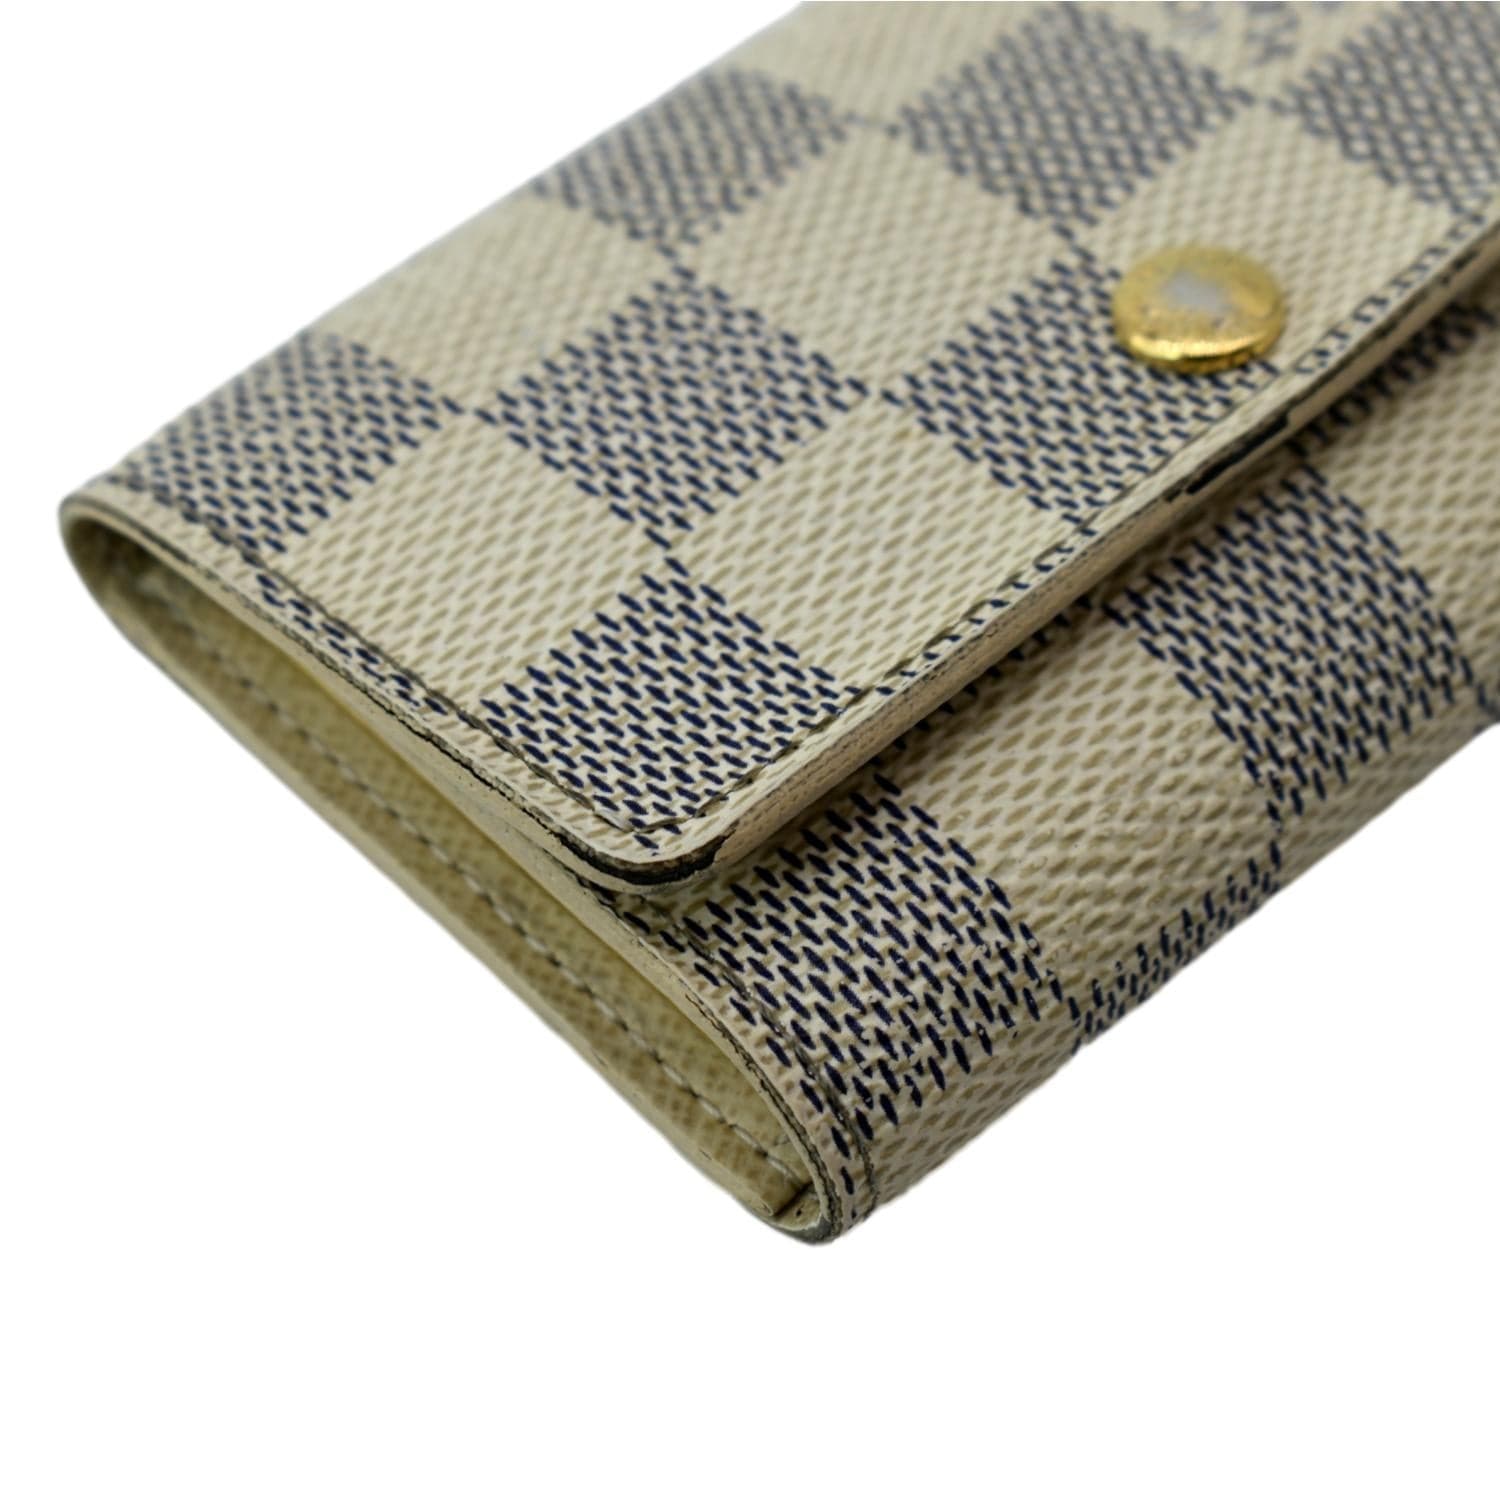 13.00 USD NEW LV Louis Vuitton Damier Wallet with gift bag  Louis vuitton  damier wallet, Louis vuitton damier, Wallet